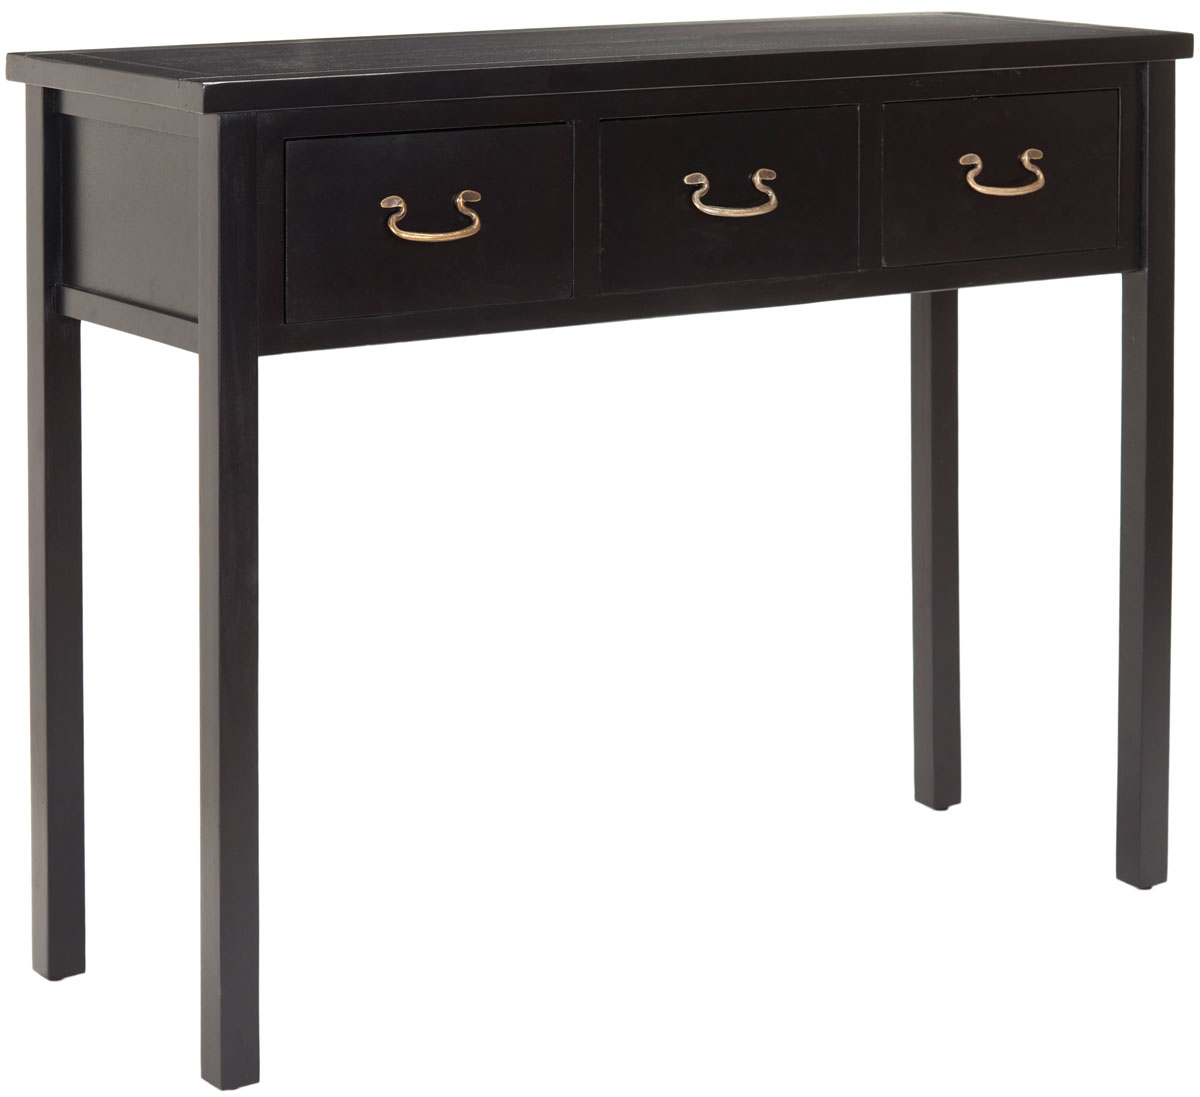 Cindy Console With Storage Drawers - Black - Arlo Home - Image 3